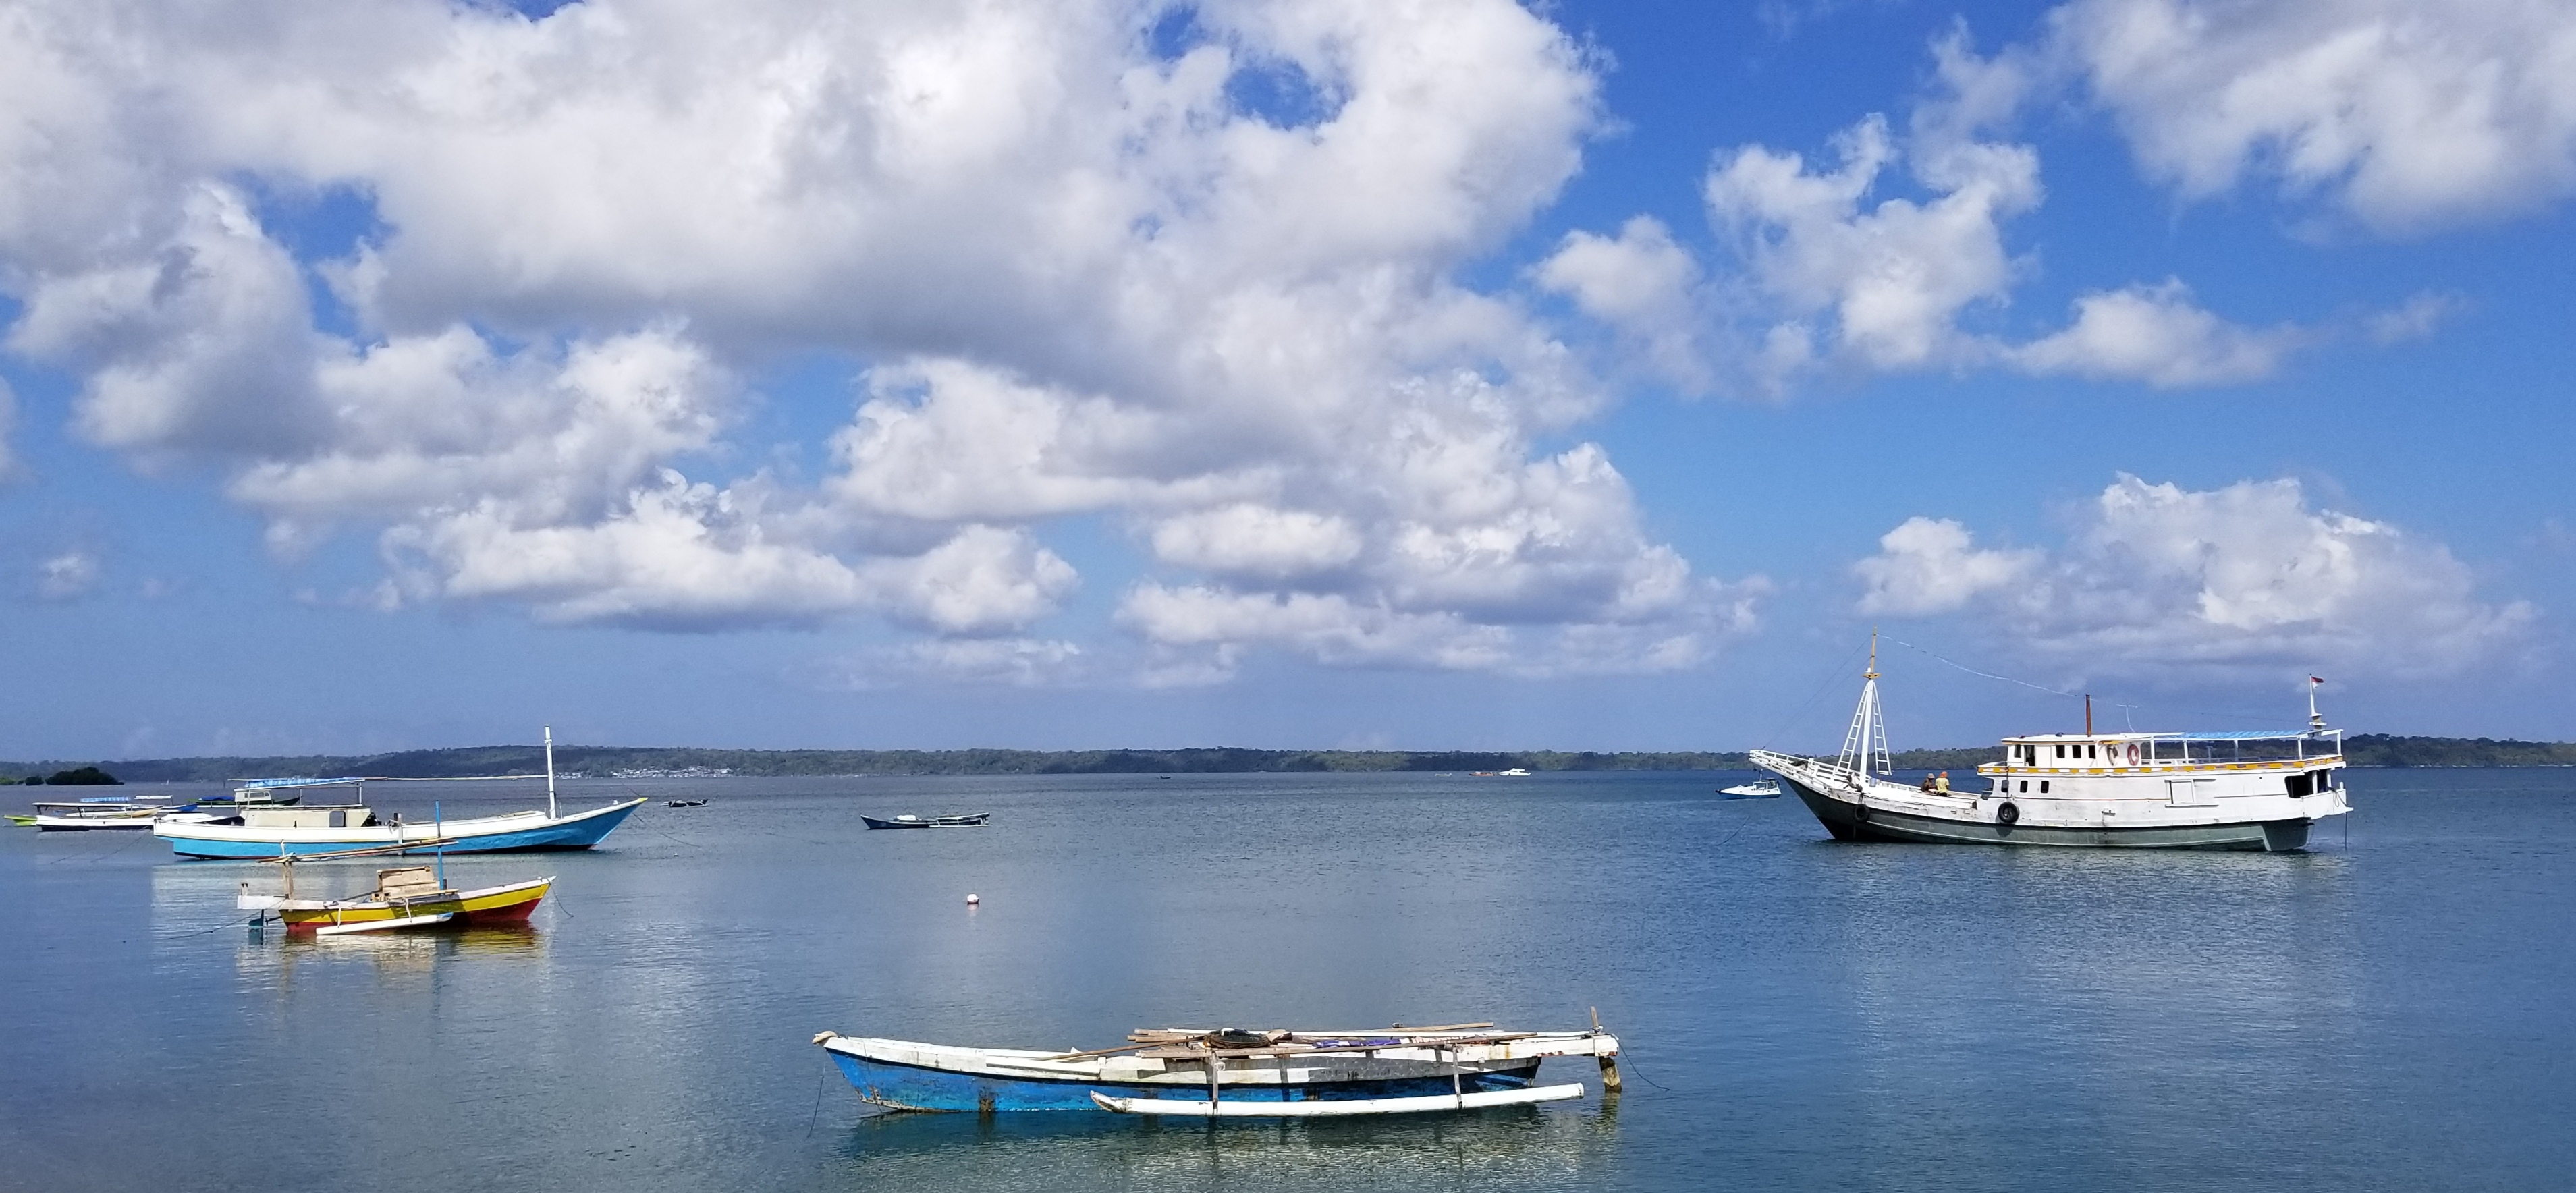 Image of four types of fishing boats on the water